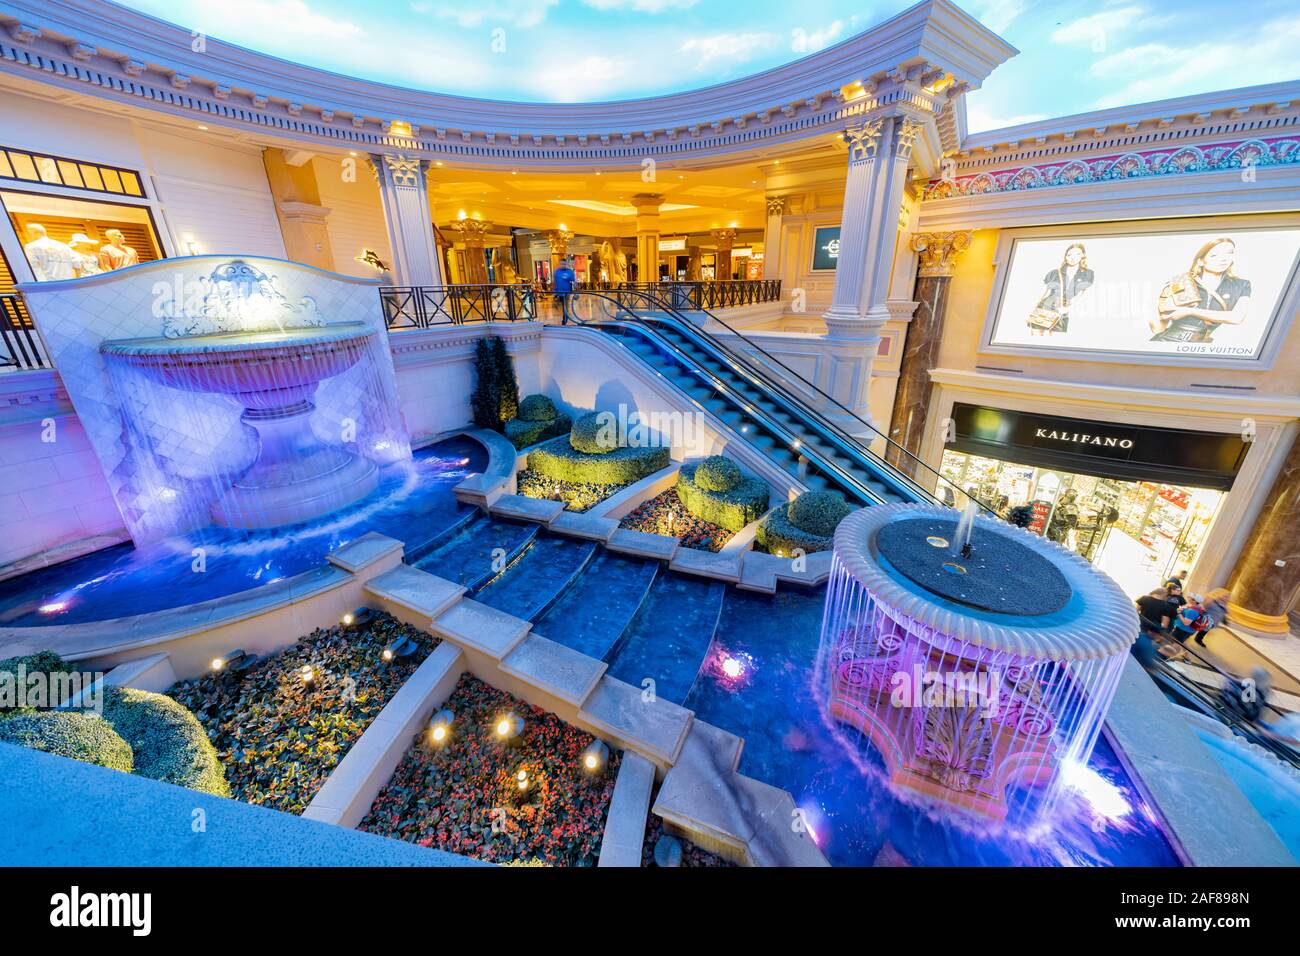 Las Vegas, JAN 1: Interior View Of The Forum Shops At Caesars Palace On JAN  1, 2020, At Las Vegas, Nevada Stock Photo, Picture and Royalty Free Image.  Image 137281408.